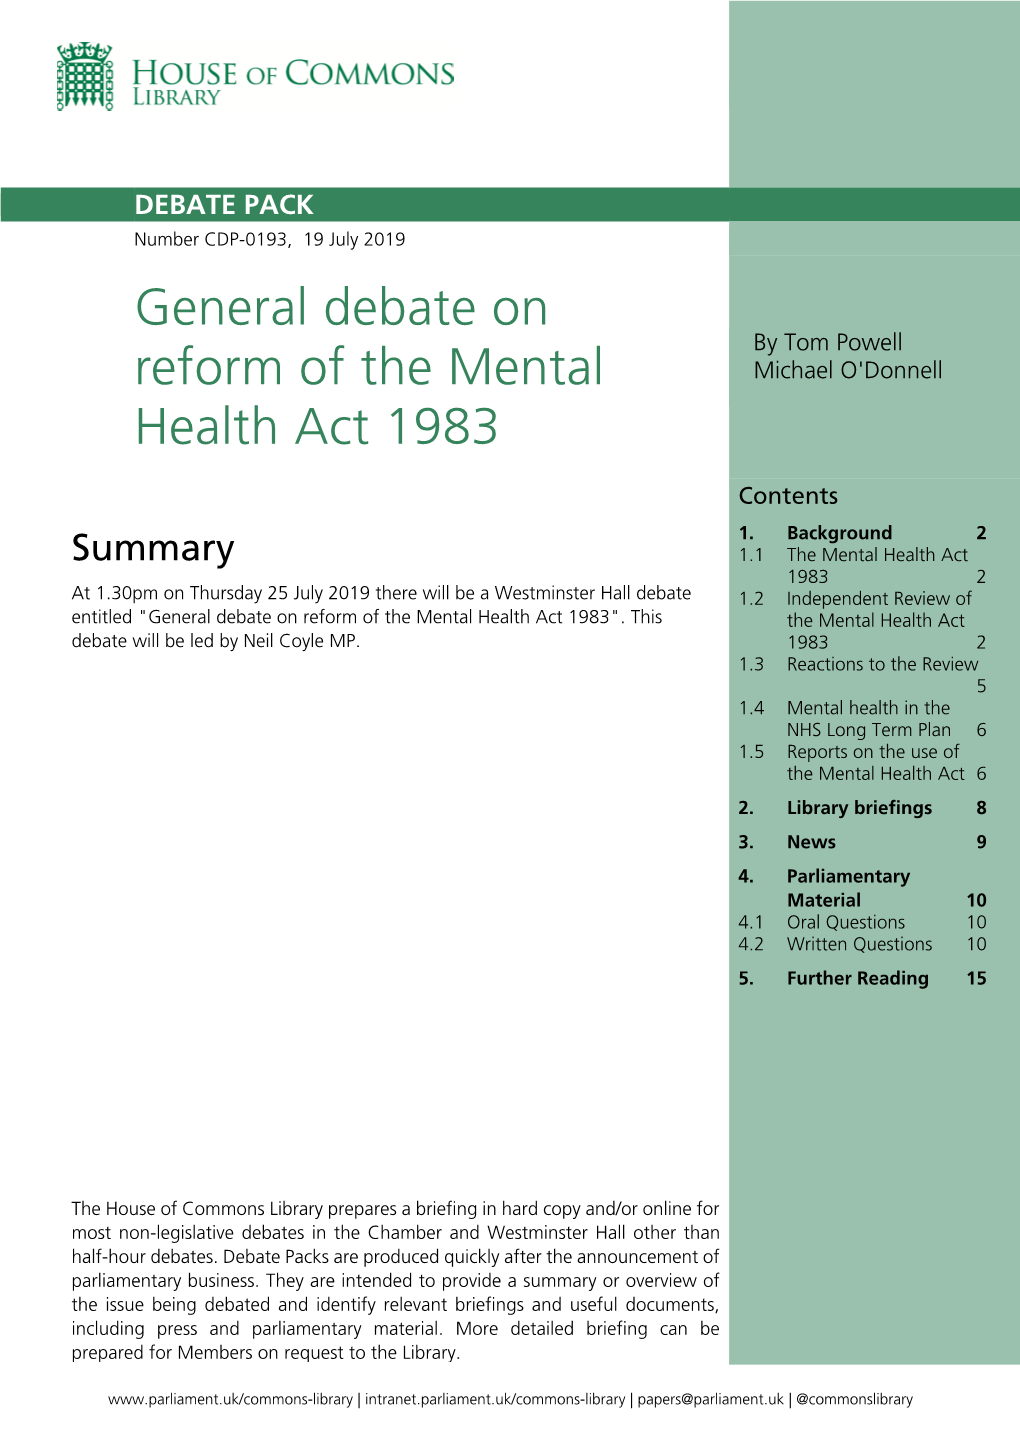 Reform of the Mental Health Act 1983